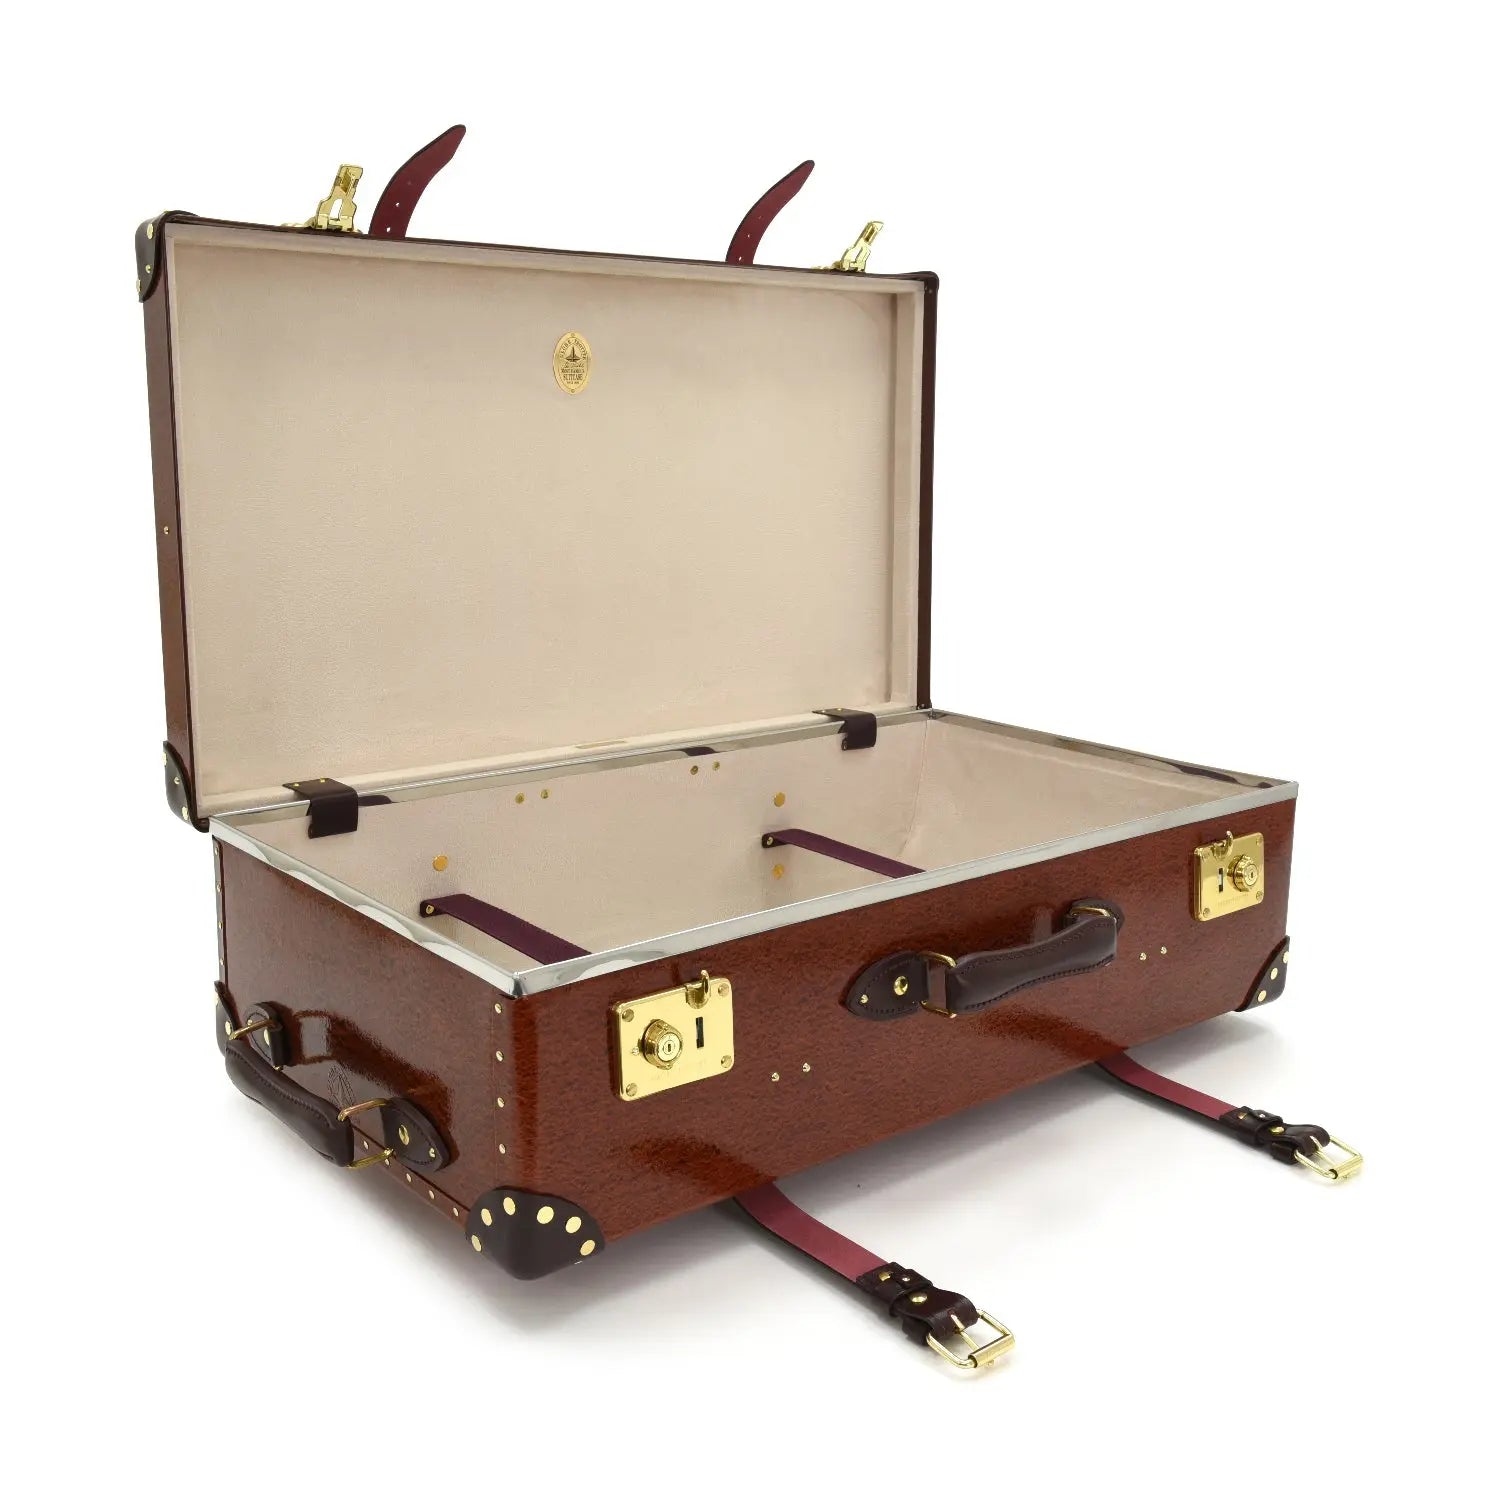 New - Orient · Large Check-In - 2 Wheels | Urushi/Burgundy/Gold - GLOBE-TROTTER